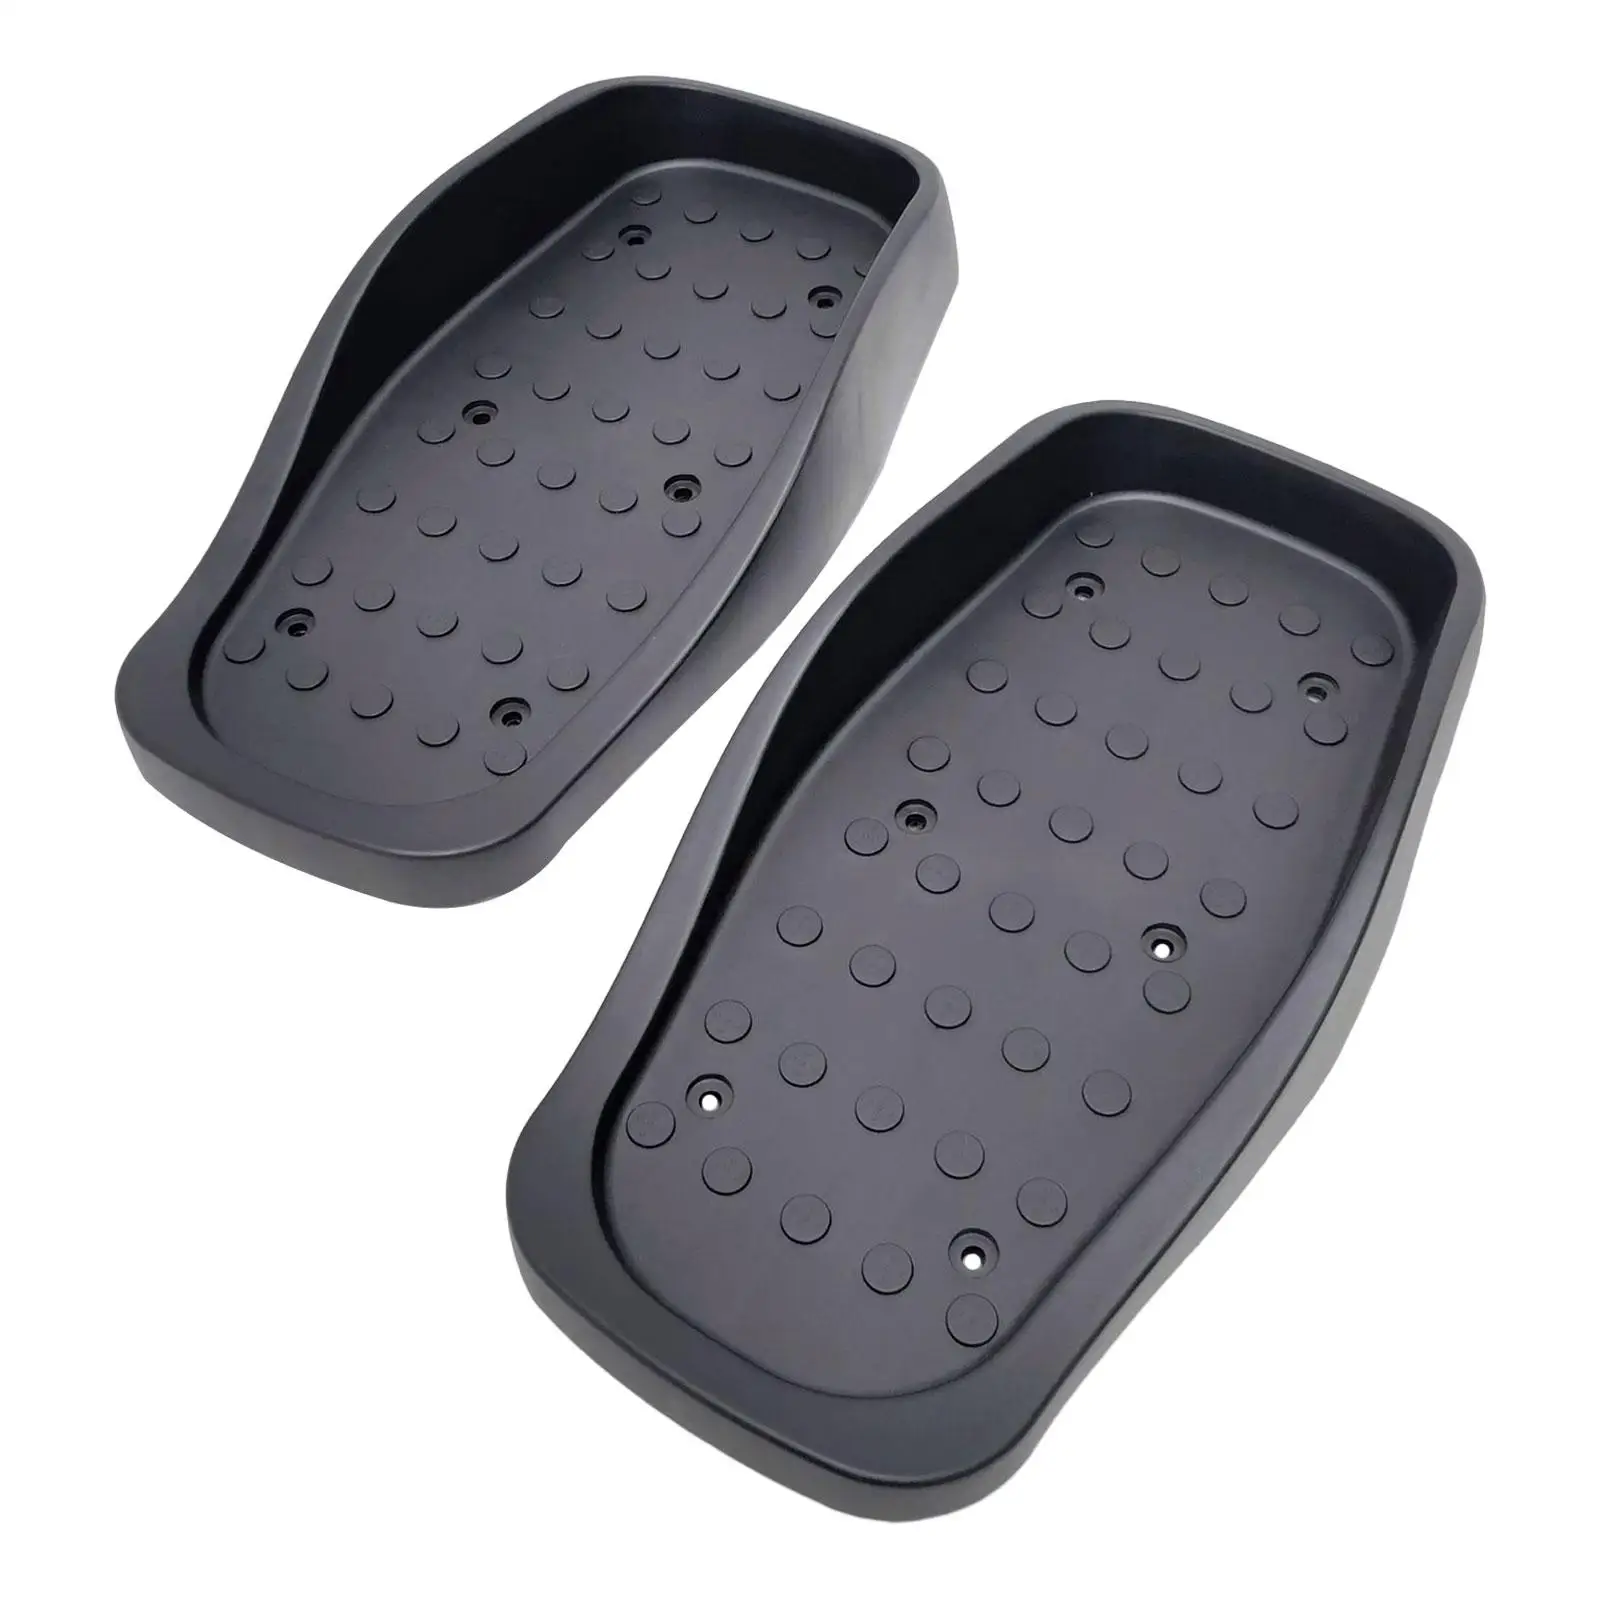 2Pcs Elliptical Trainer Pedals Replacement Parts Repair Fitness Equipment Footboard for Home Use Exercise Cardio Training